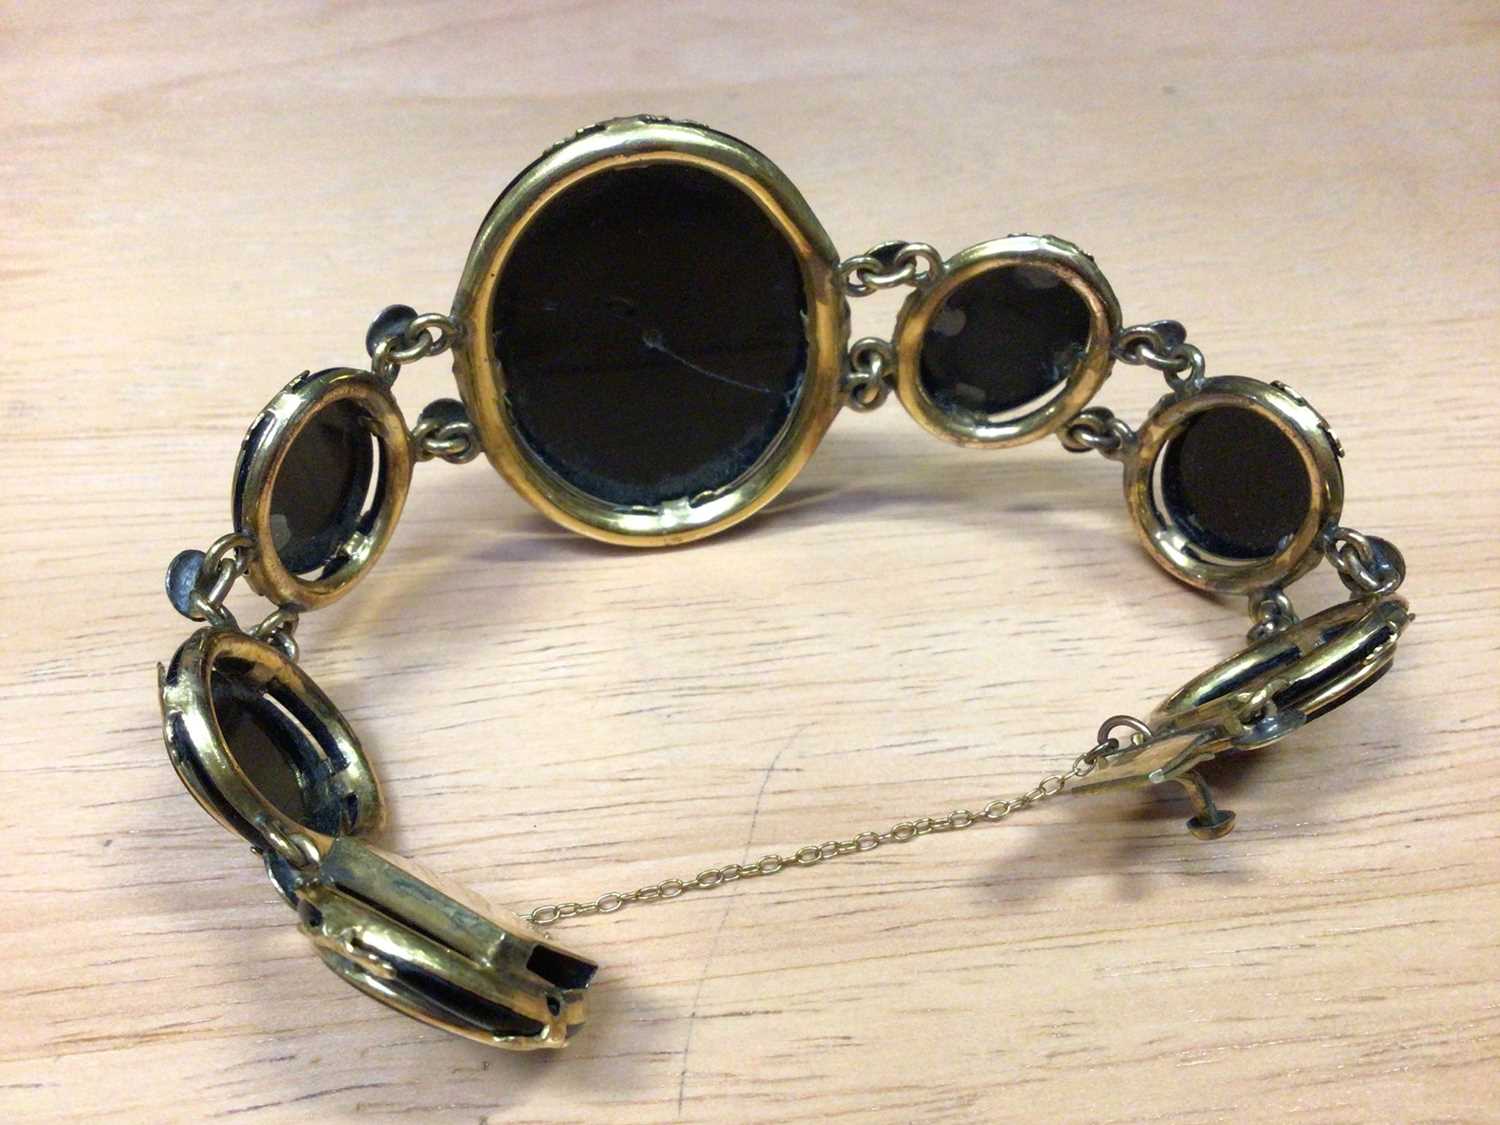 Victorian black glass cameo bracelet in yellow metal setting together with a black onyx and silver b - Image 4 of 5